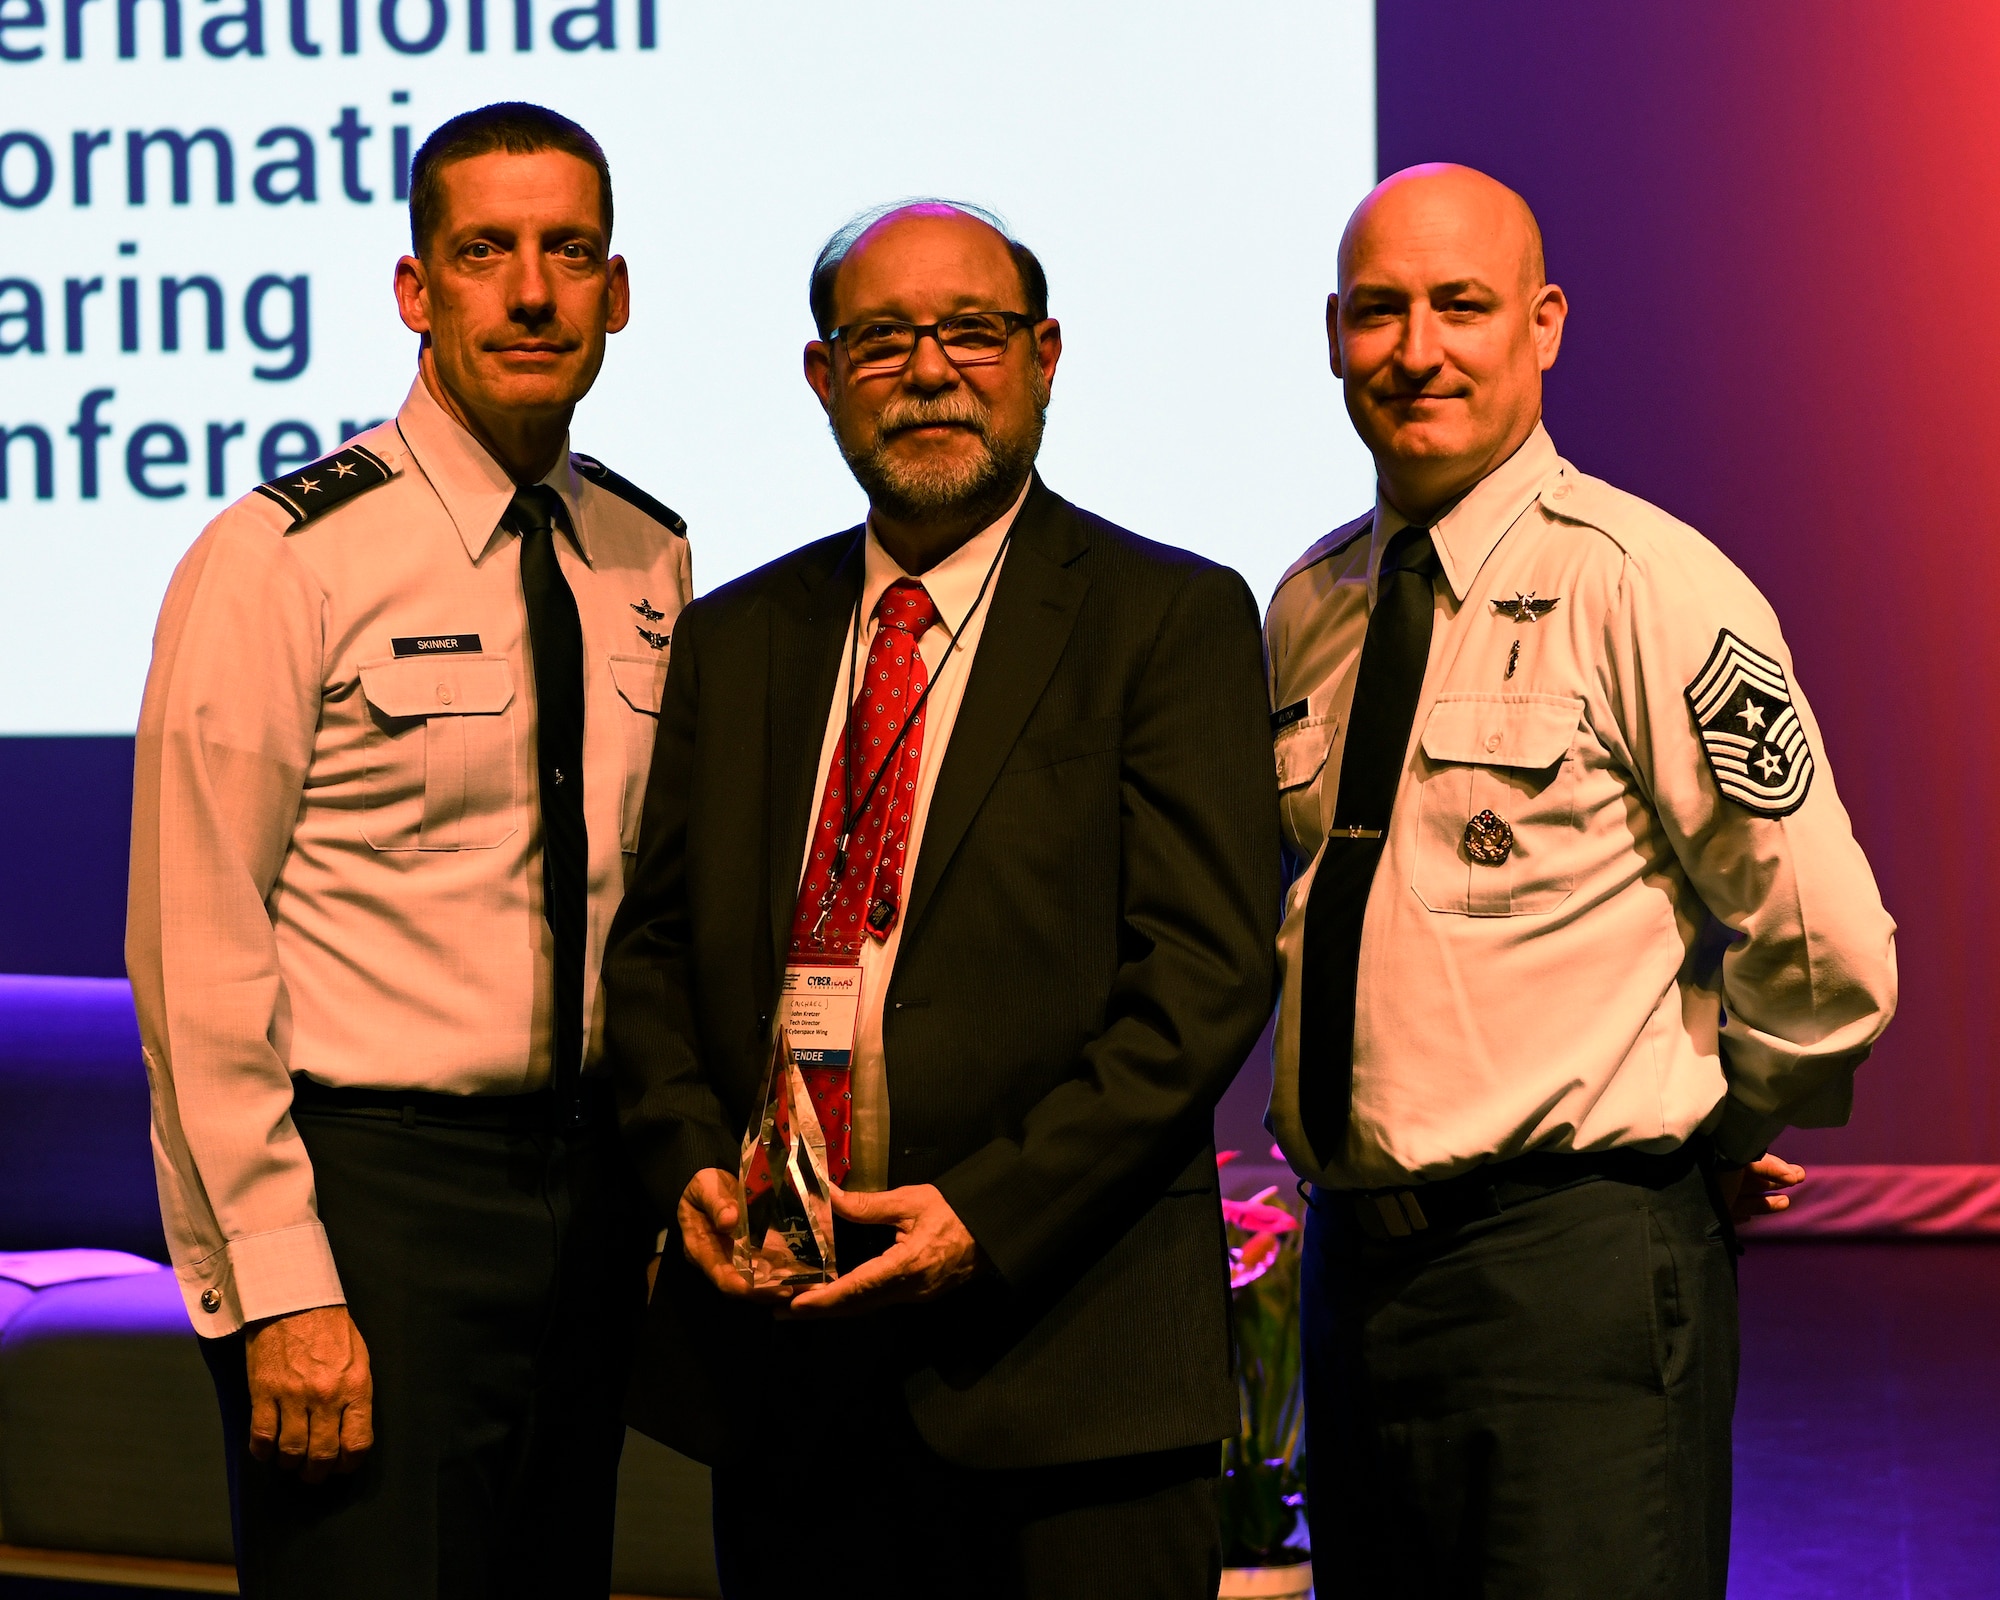 J. Michael Kretzer, 688th Cyberspace Wing technical director, poses for a photo with Maj. Gen. Robert Skinner, 24th Air Force commander, and Chief Master Sgt. David Klink, 24th AF command chief, after being inducted into the CyberTexas Foundation’s 2019 Cyber Hall of Honor in San Antonio, Aug. 20, 2019. Kretzer was honored for his nearly 45 years of cybersecurity service to the nation. (U.S. Air Force photo by Tech. Sgt. R.J. Biermann)